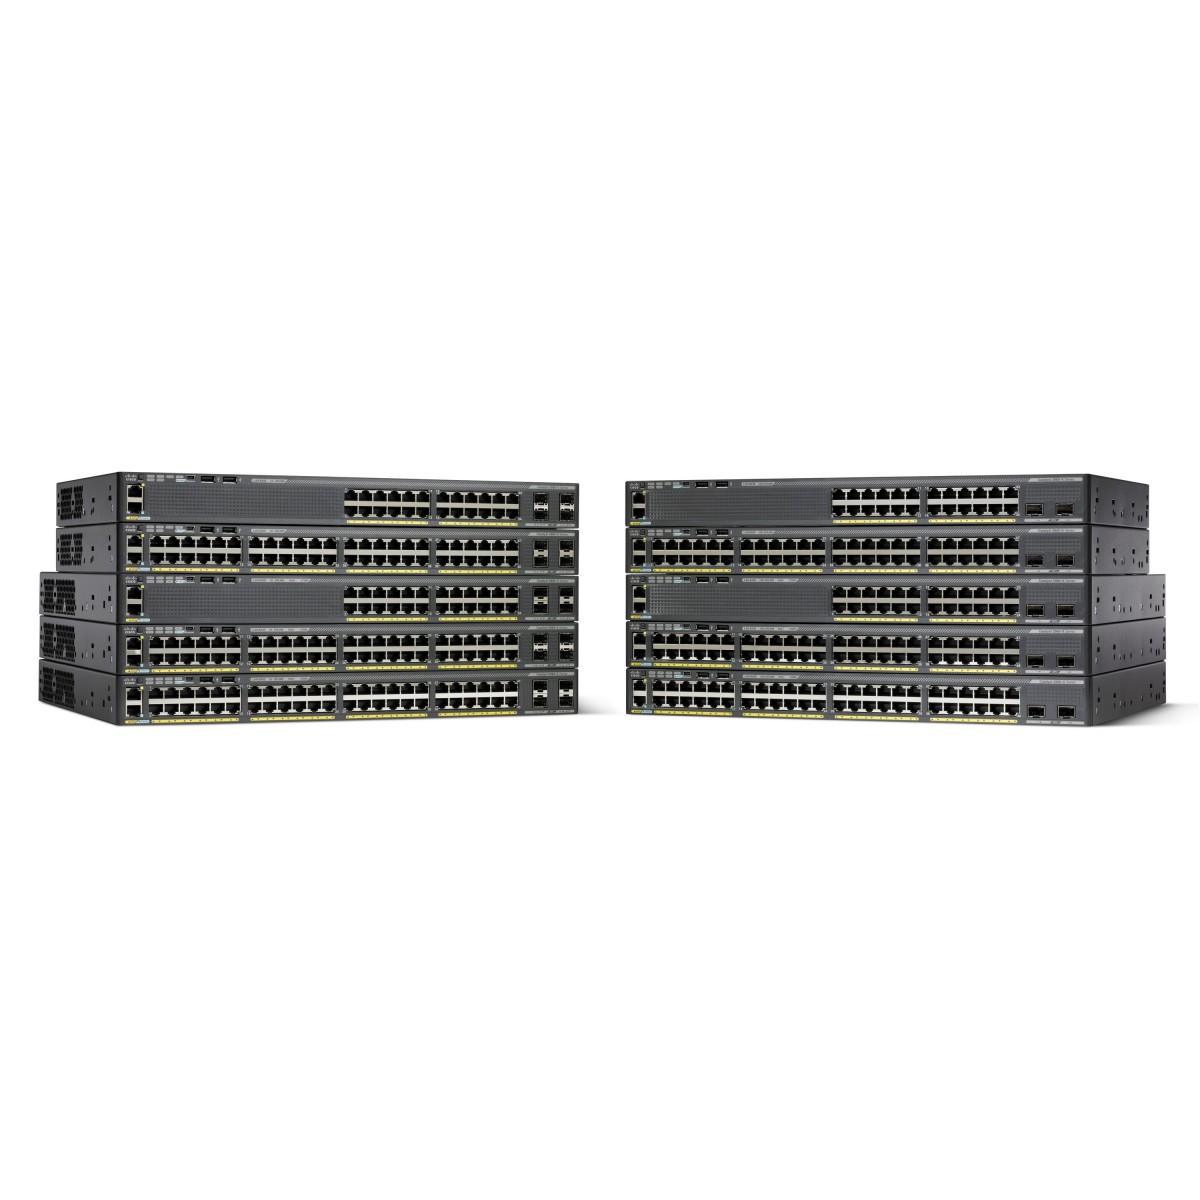 Cisco Catalyst 2960X-48TS-L 48 Ports Manageable Ethernet Switch - 2 Layer Supported - Twisted Pair - 1U High - Rack-mountable, D